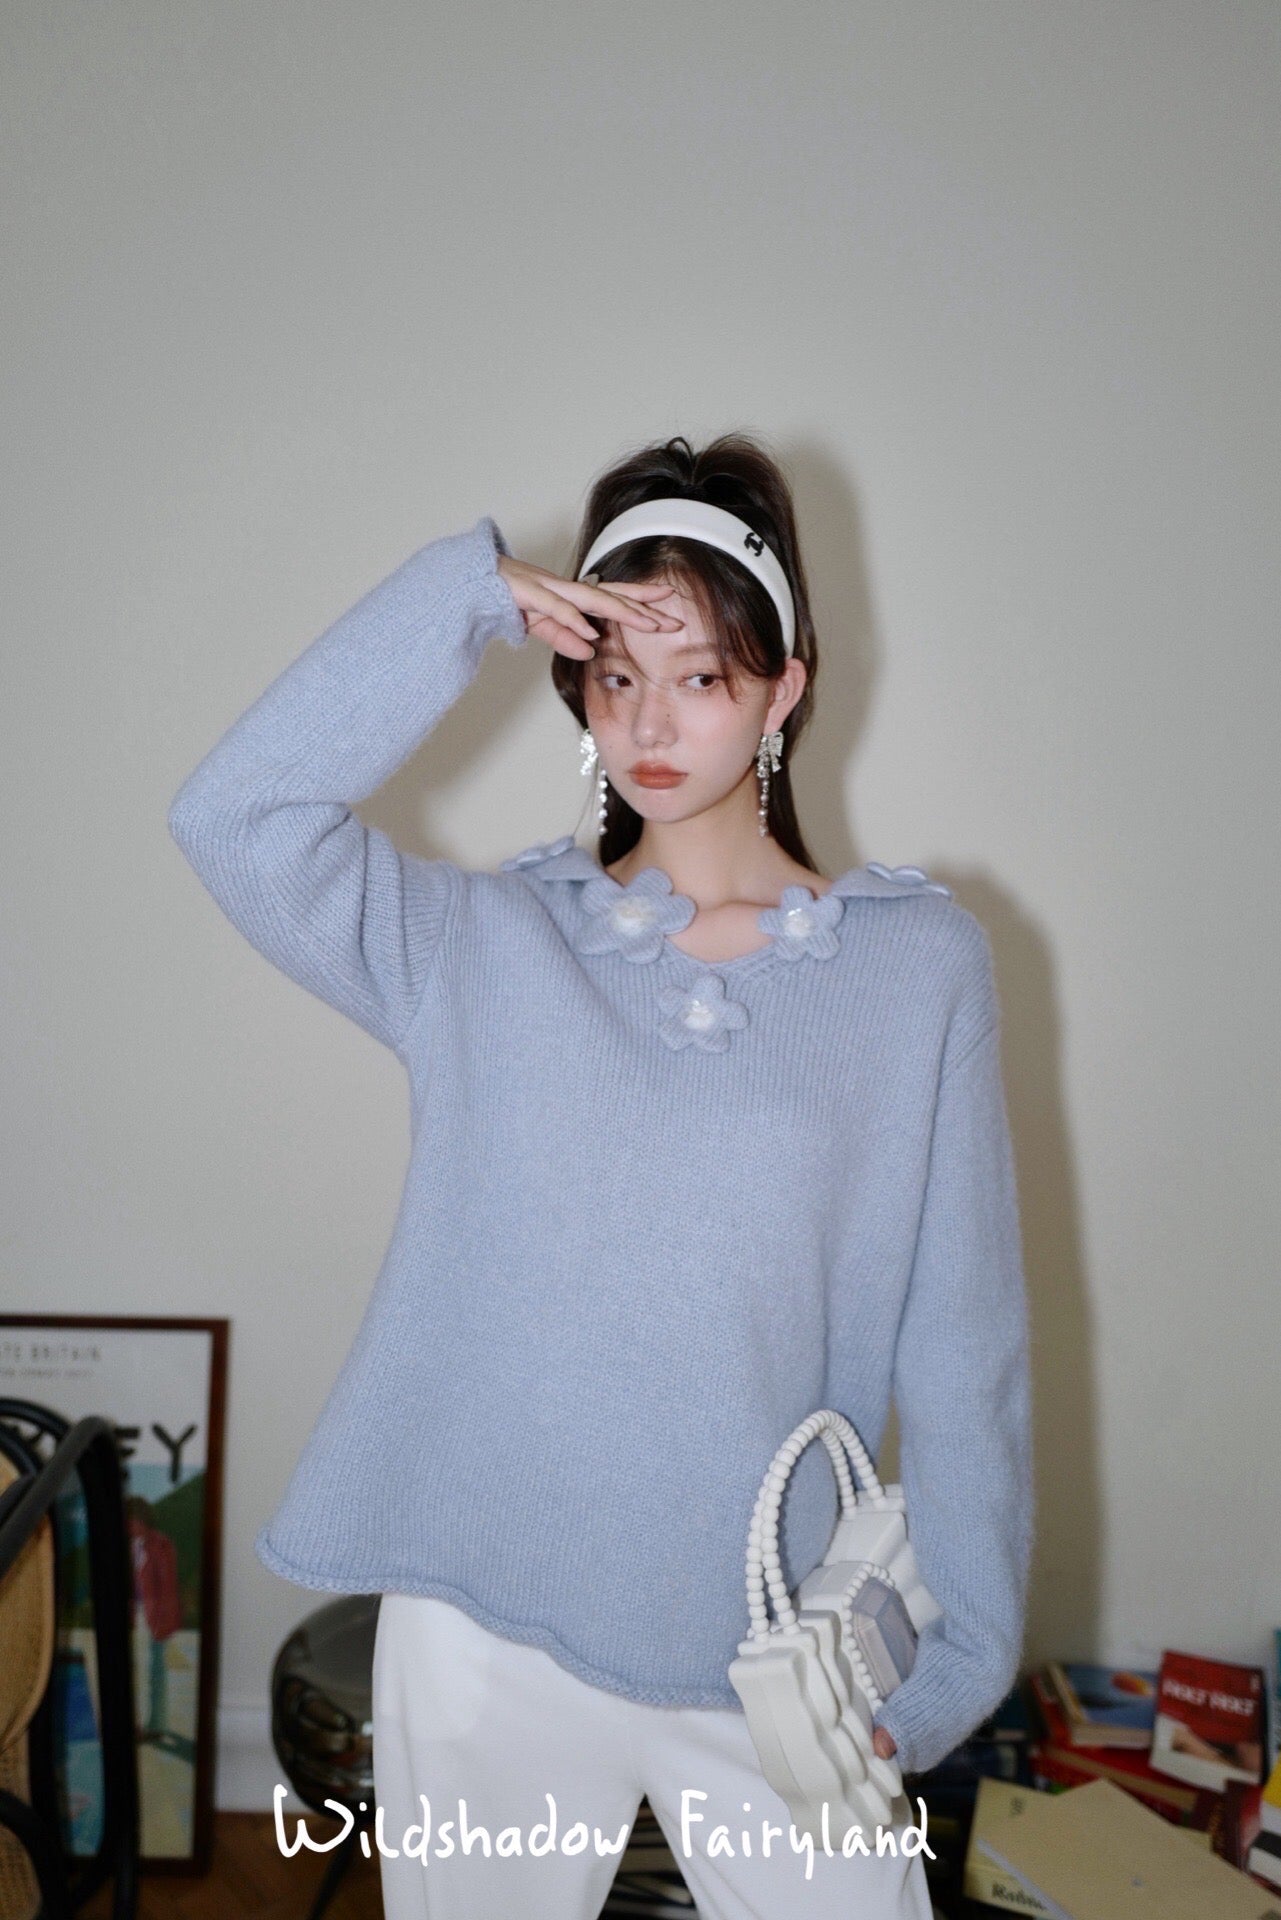 Flower Collared Knit Sweater Blue